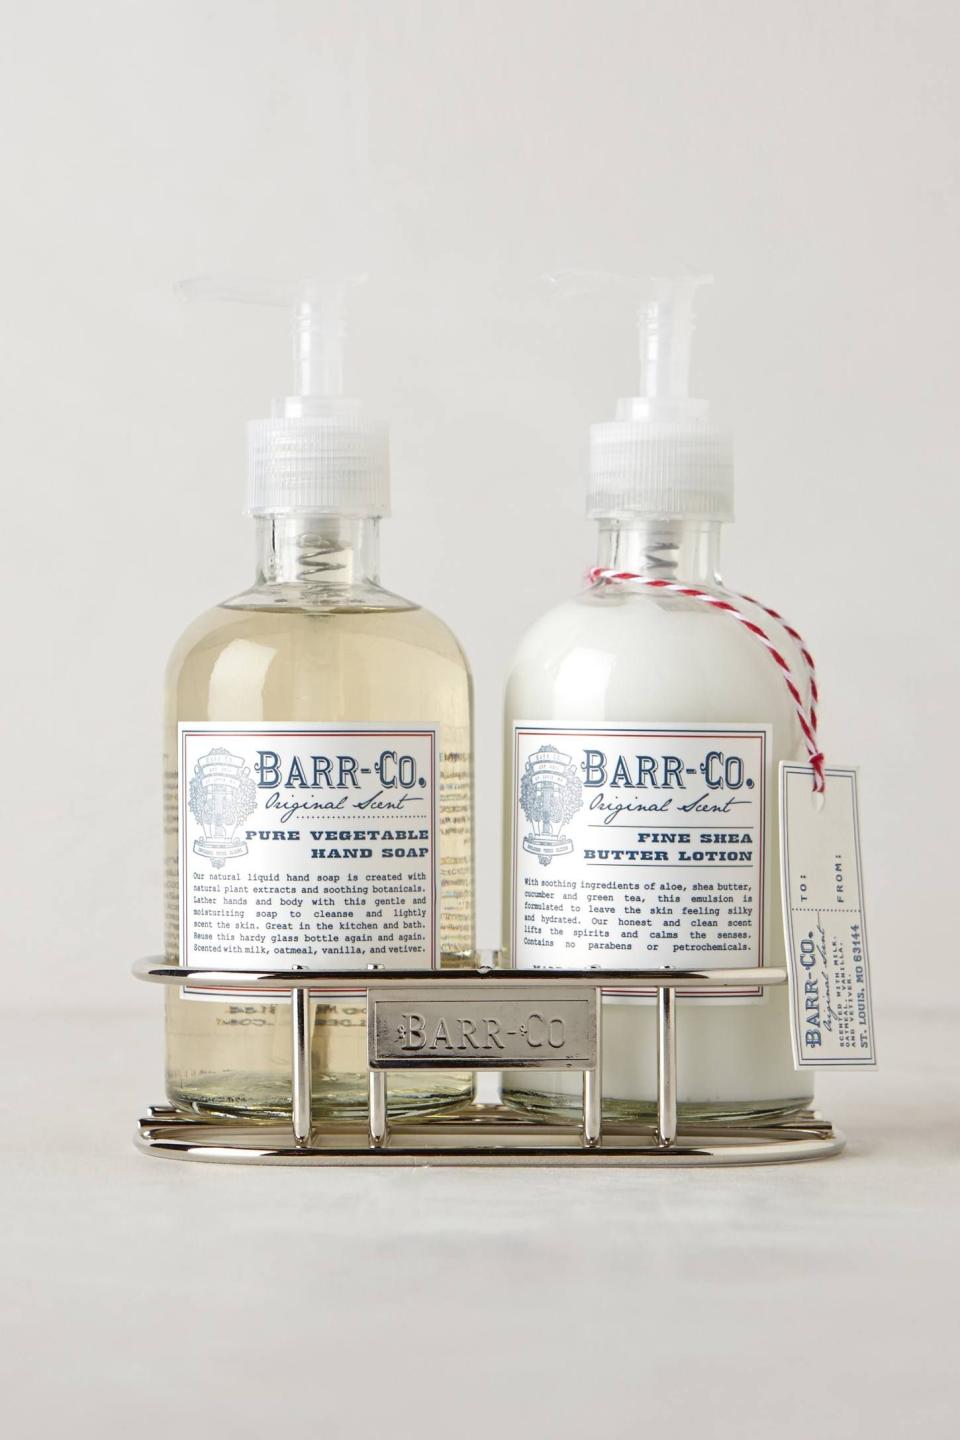 2) Barr-Co. Anthropologie Barr-Co. Hand Duo